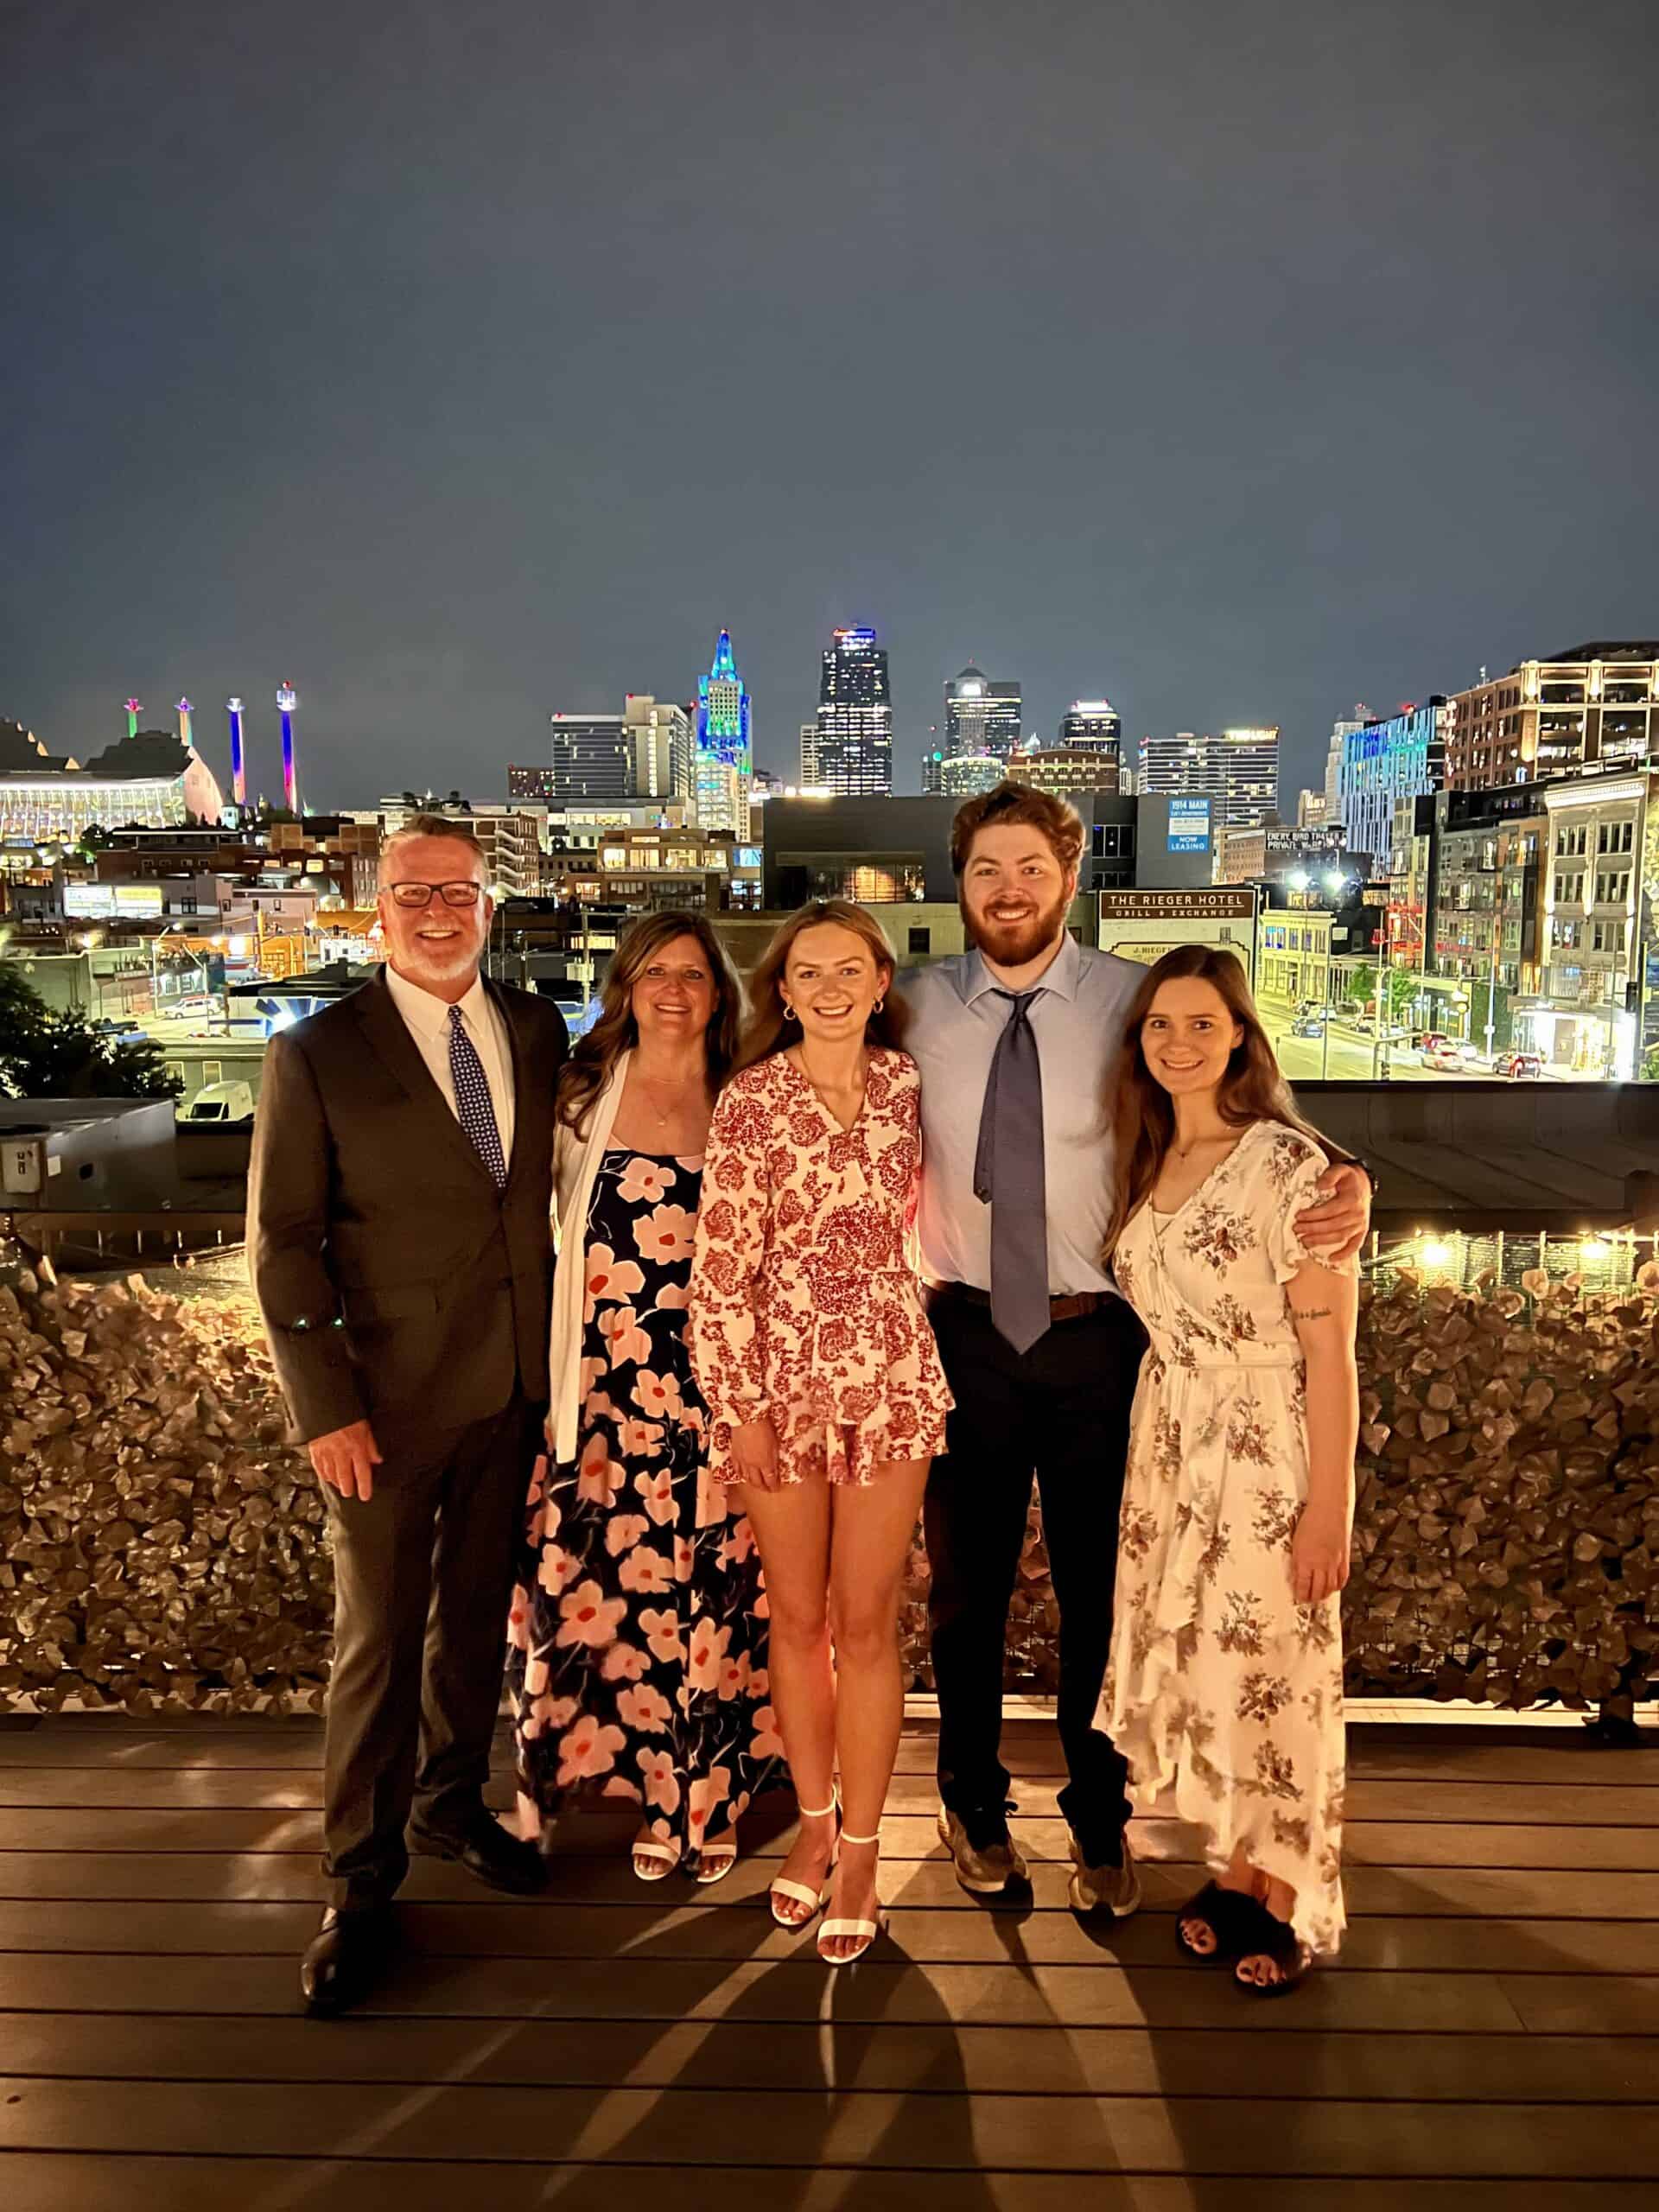 Corey's son, Tanner Thomas, recently received a degree in mechanical engineering, and his daughter, Grace Thomas (center), is currently studying fashion business at K-State.